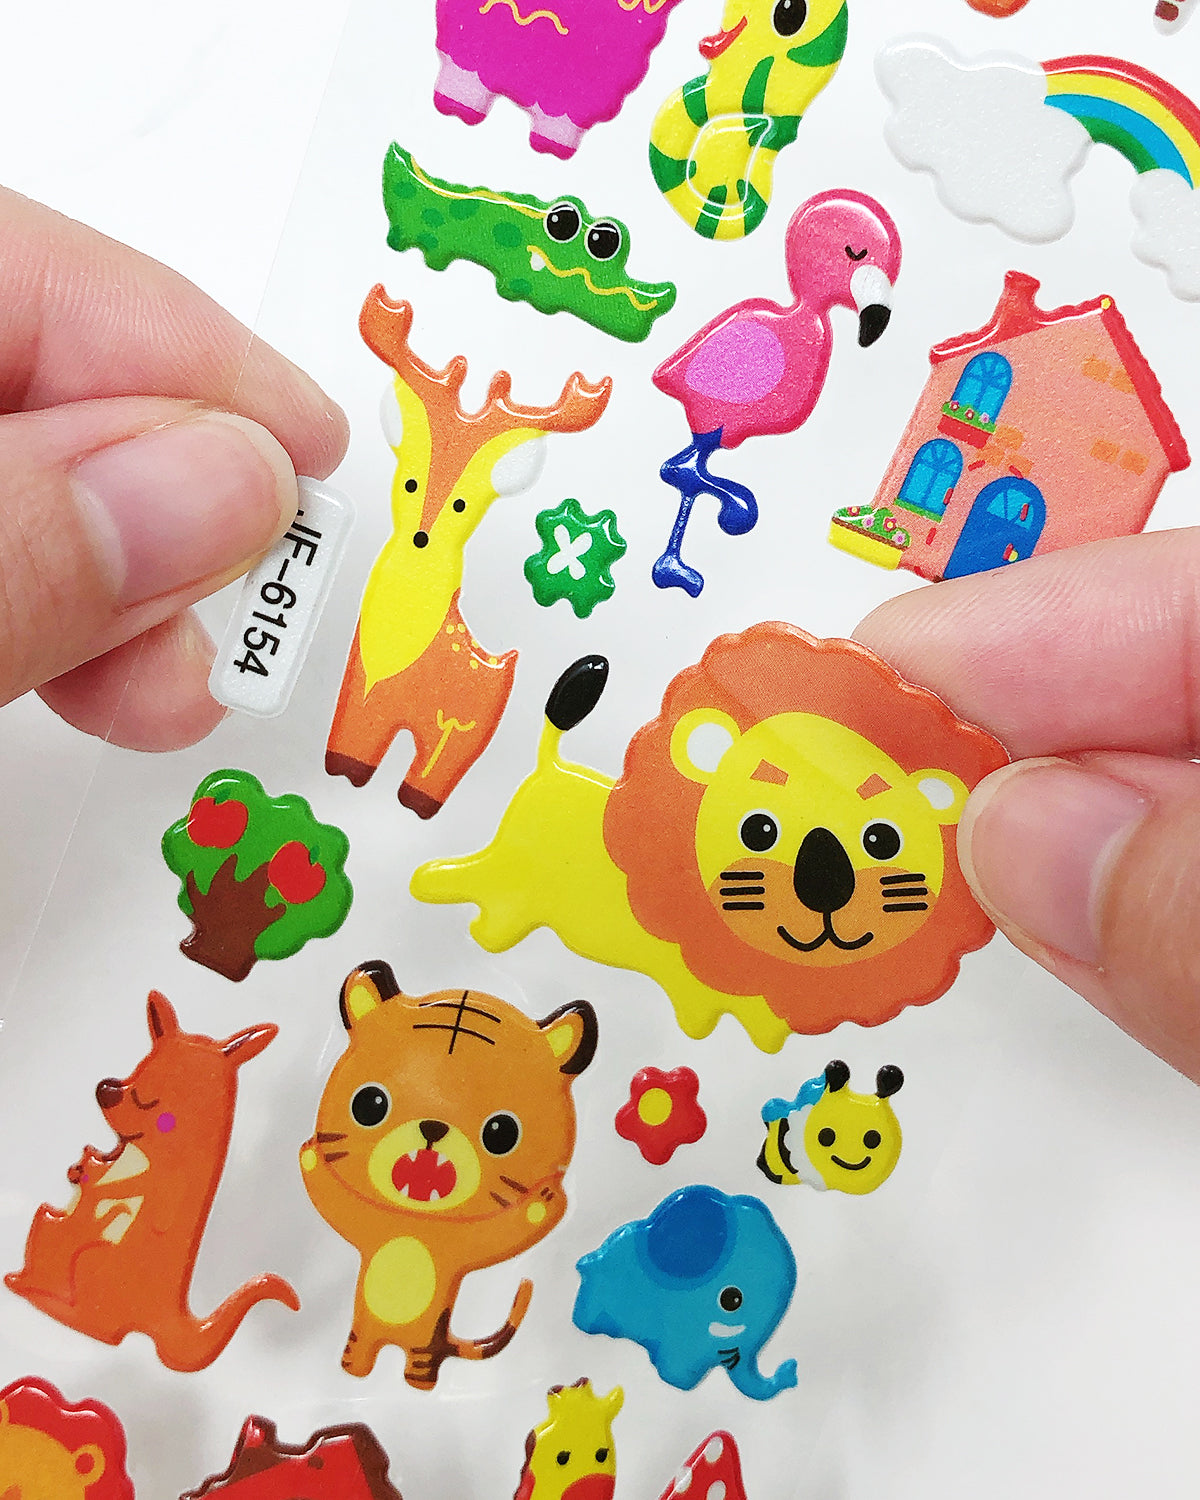 Wrapables 3D Puffy Stickers Bubble Stickers for Crafts & Scrapbooking